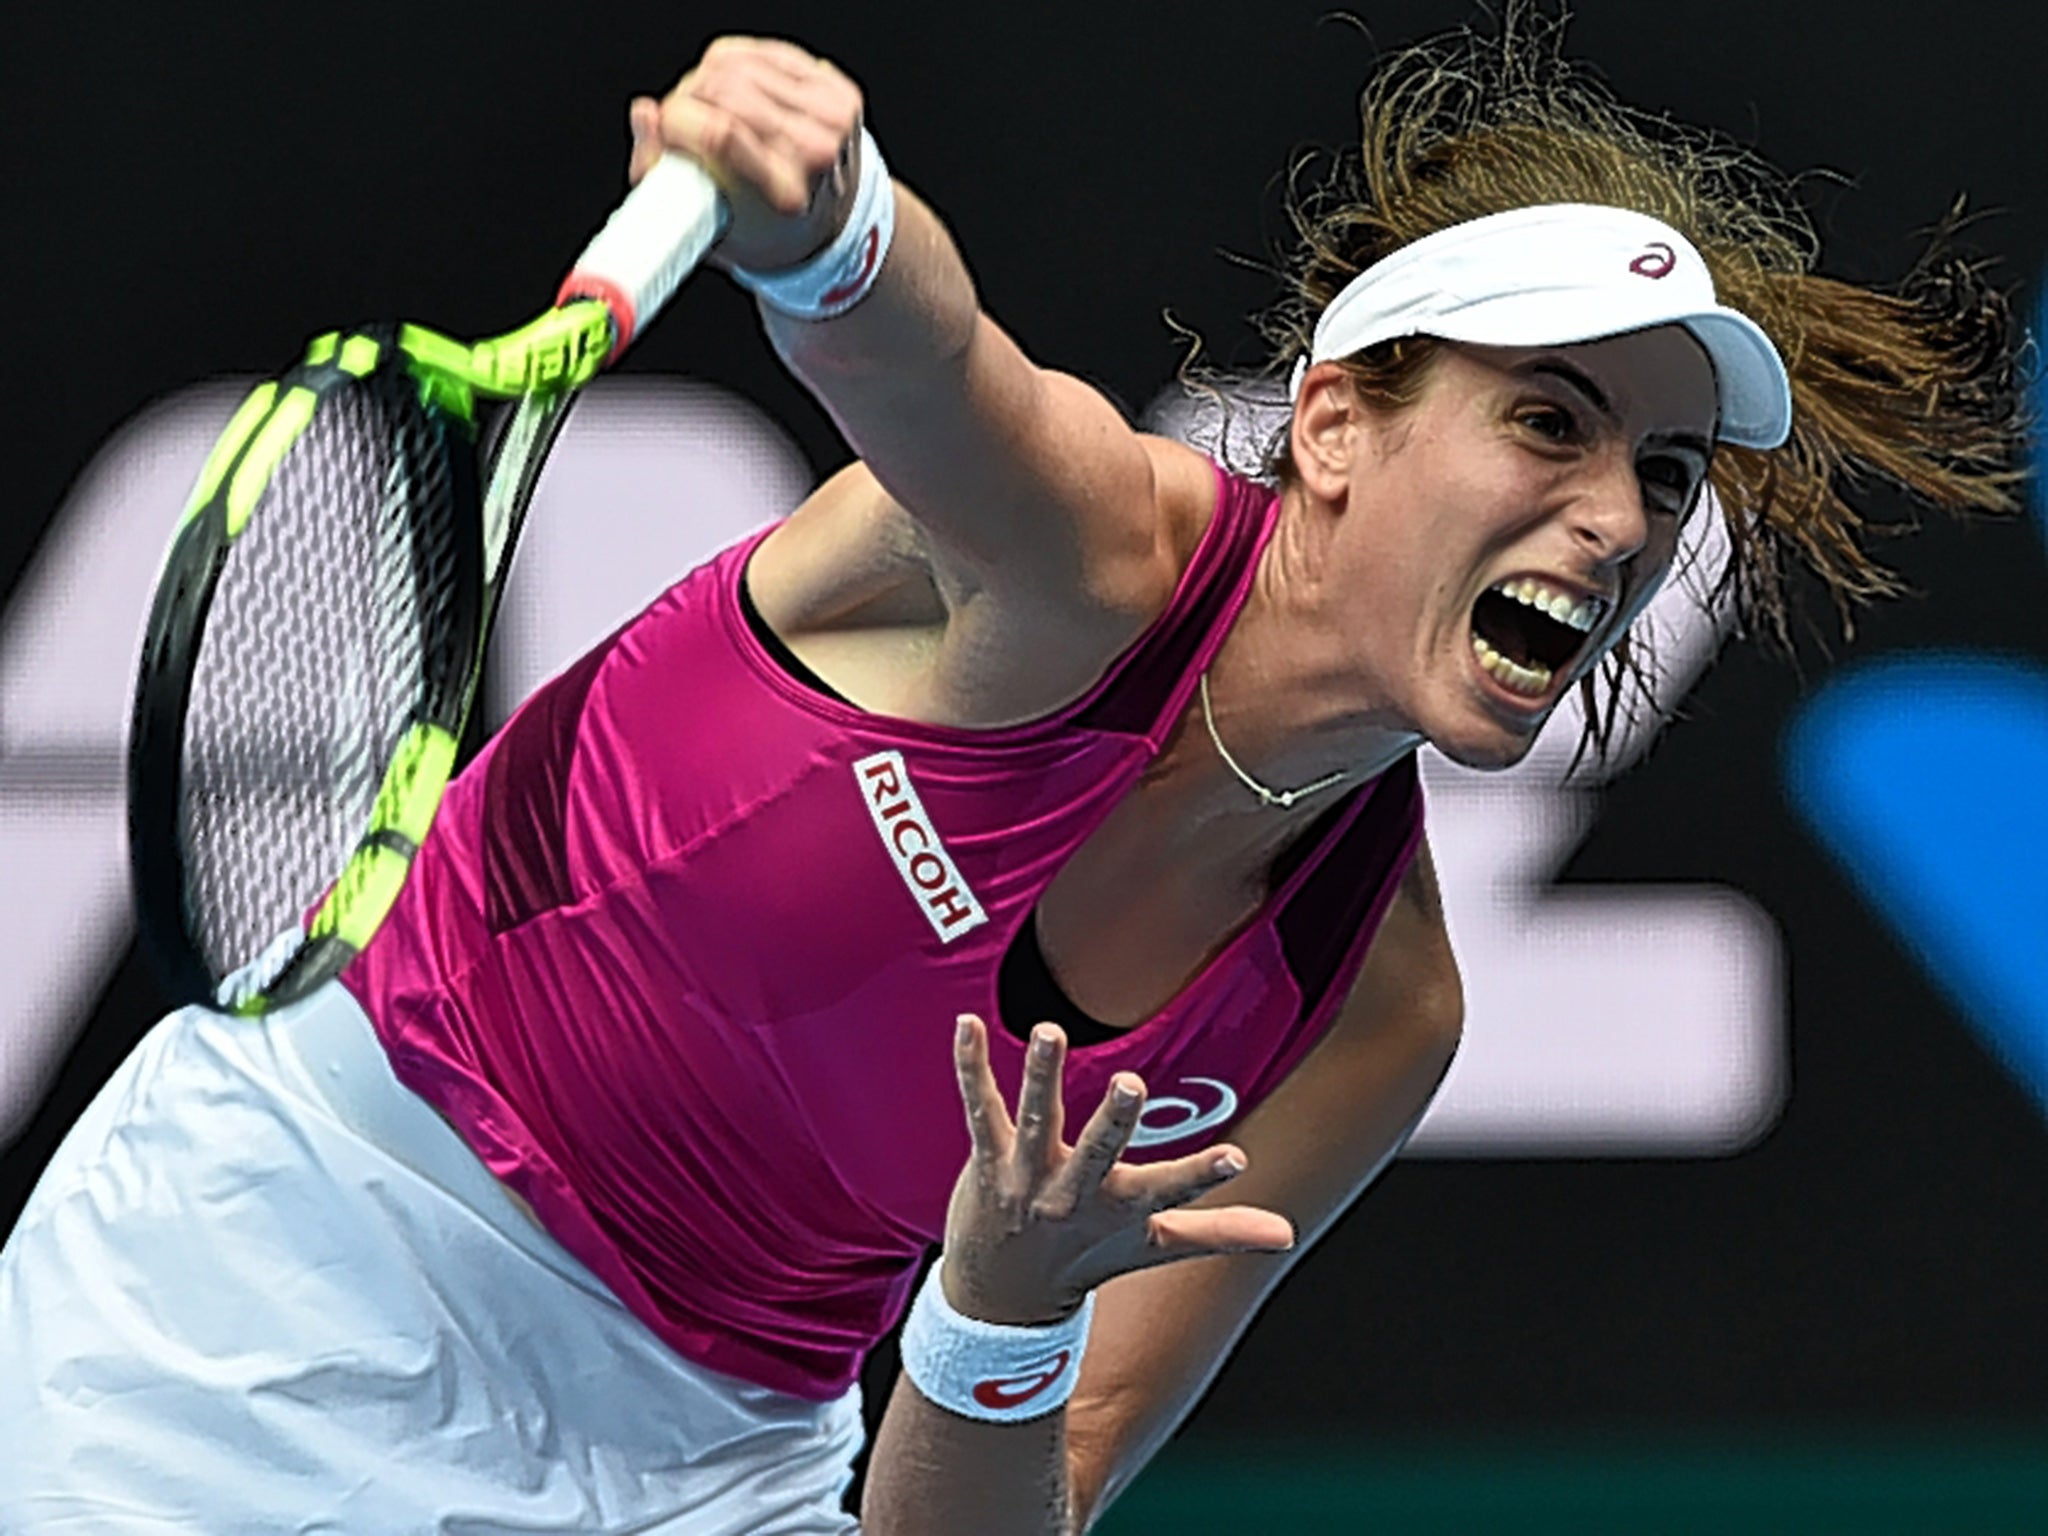 Johanna Konta was born in Australia to Hungarian parents but lived in Britain from a young age. If she says she feels British who are we to argue?